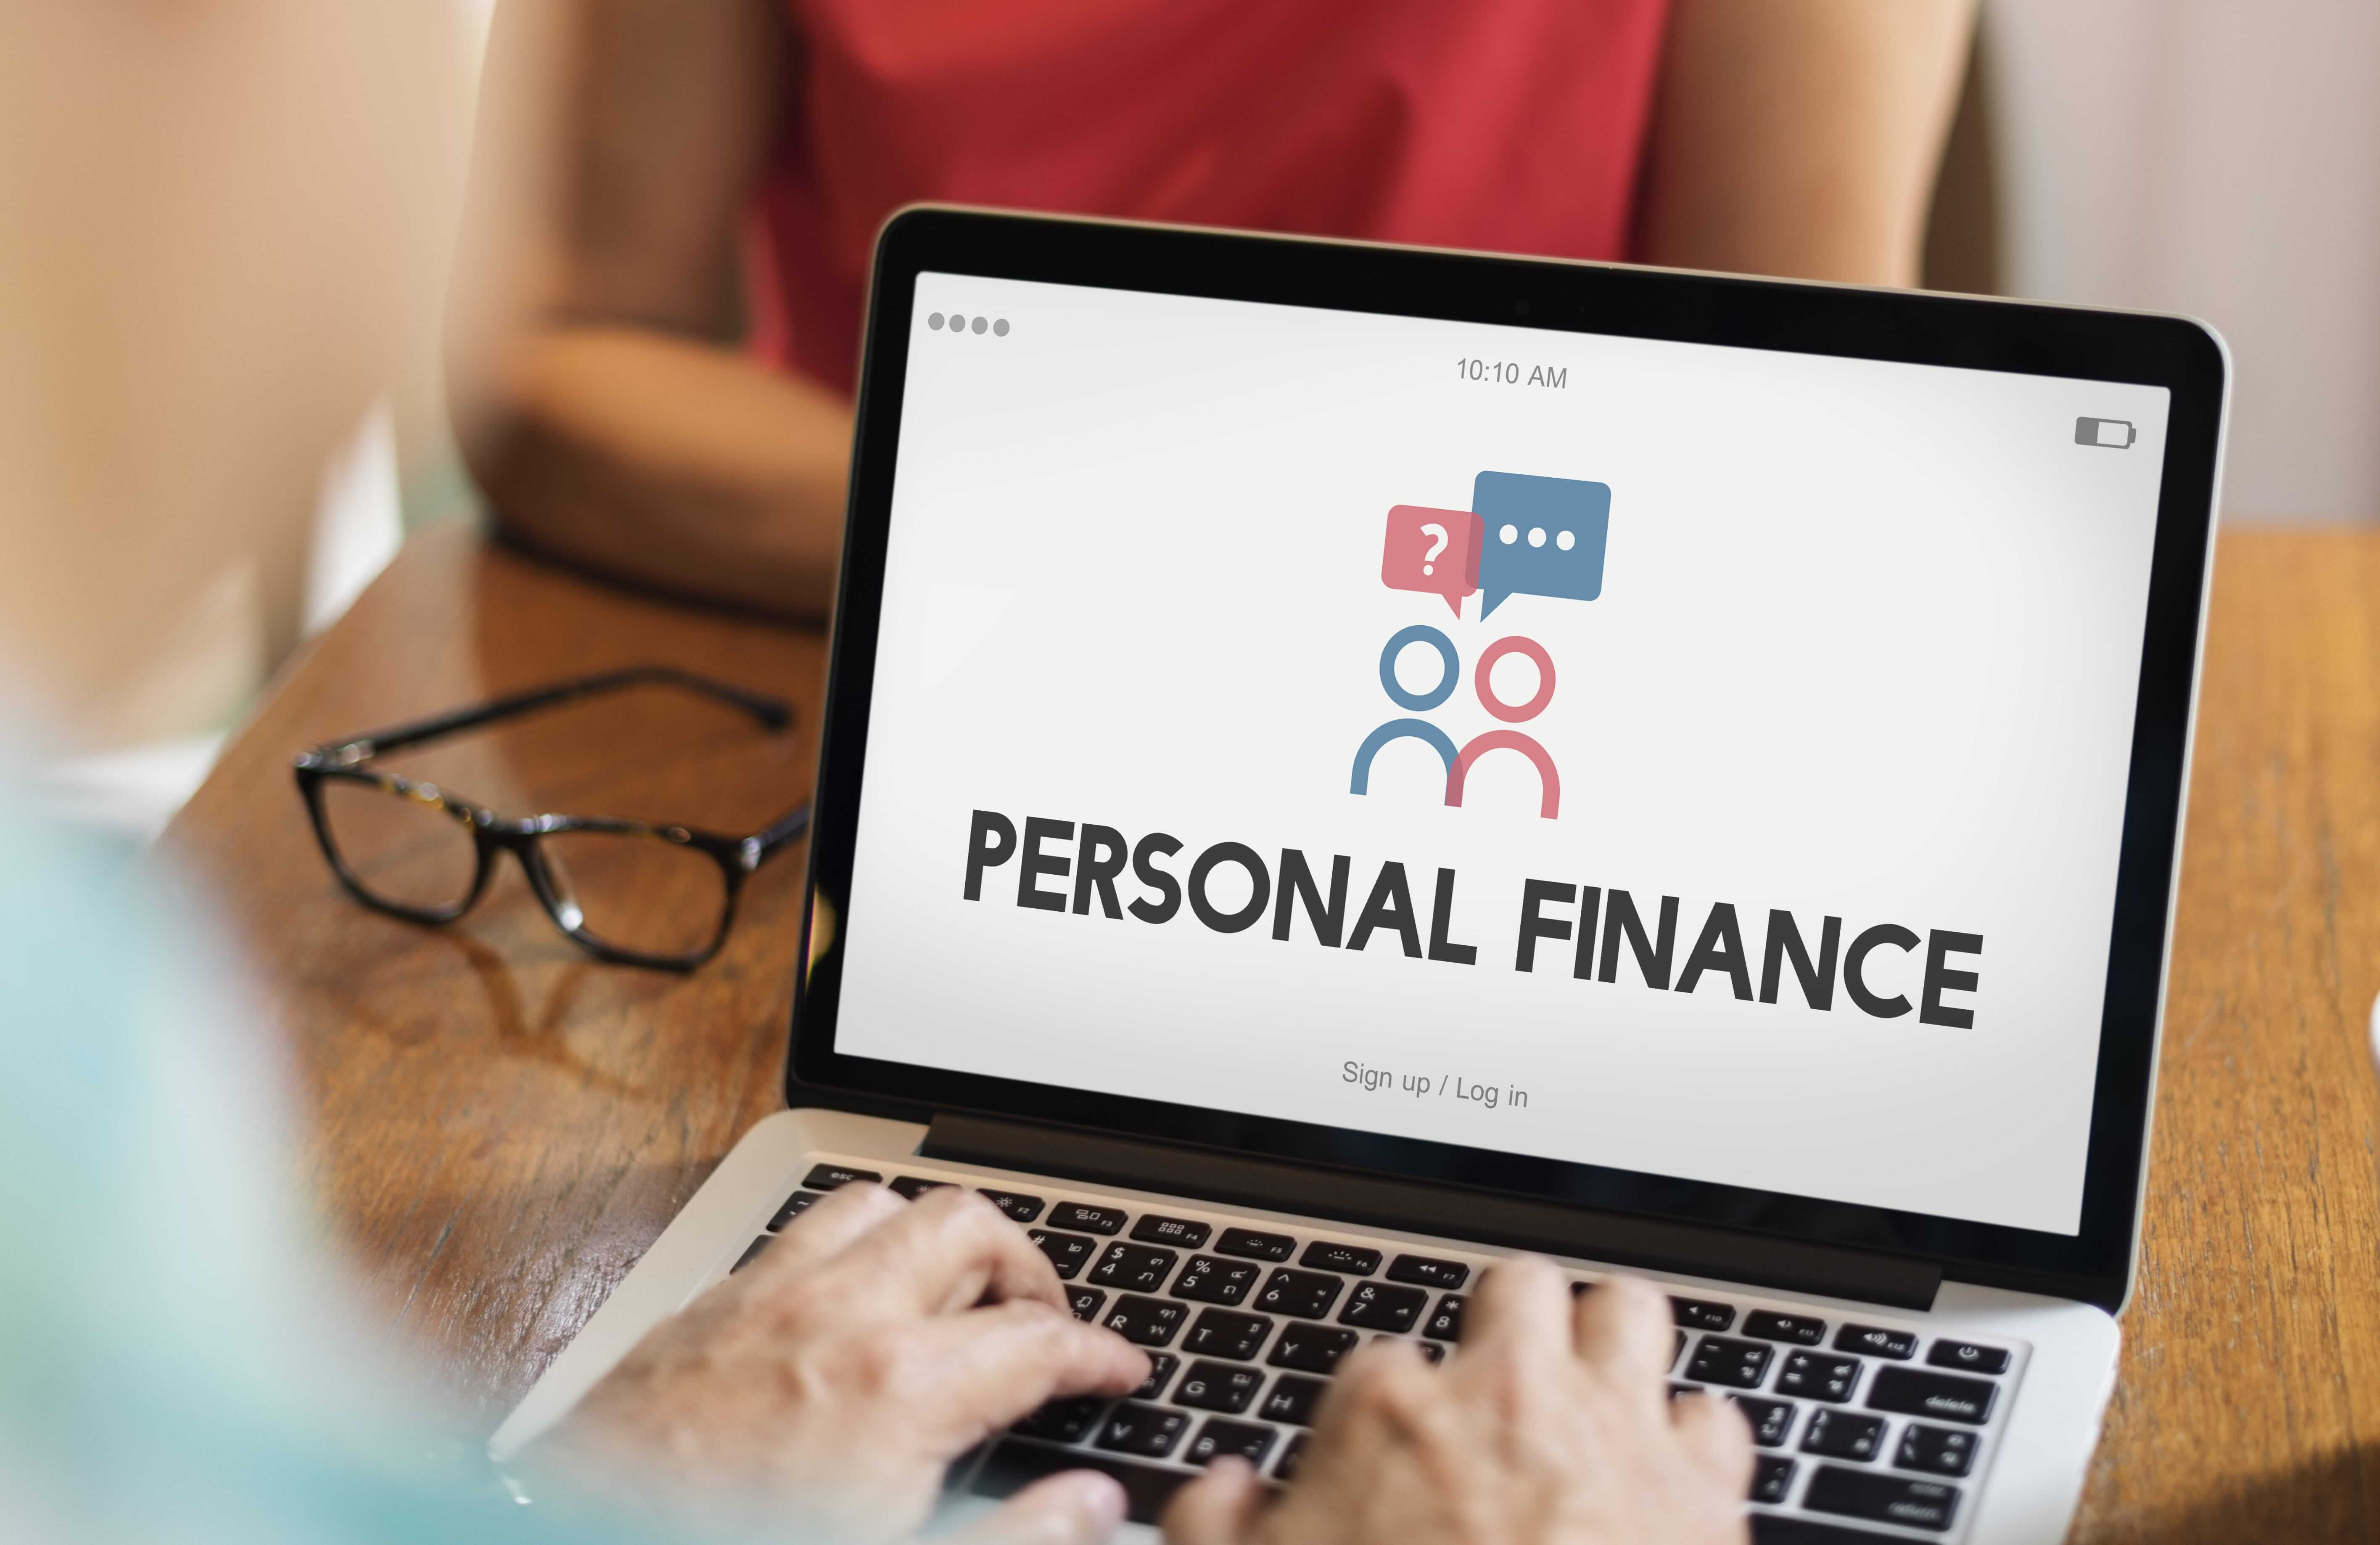 Take A Look At These Personal Finance Tips! - Fun Lovin Criminals